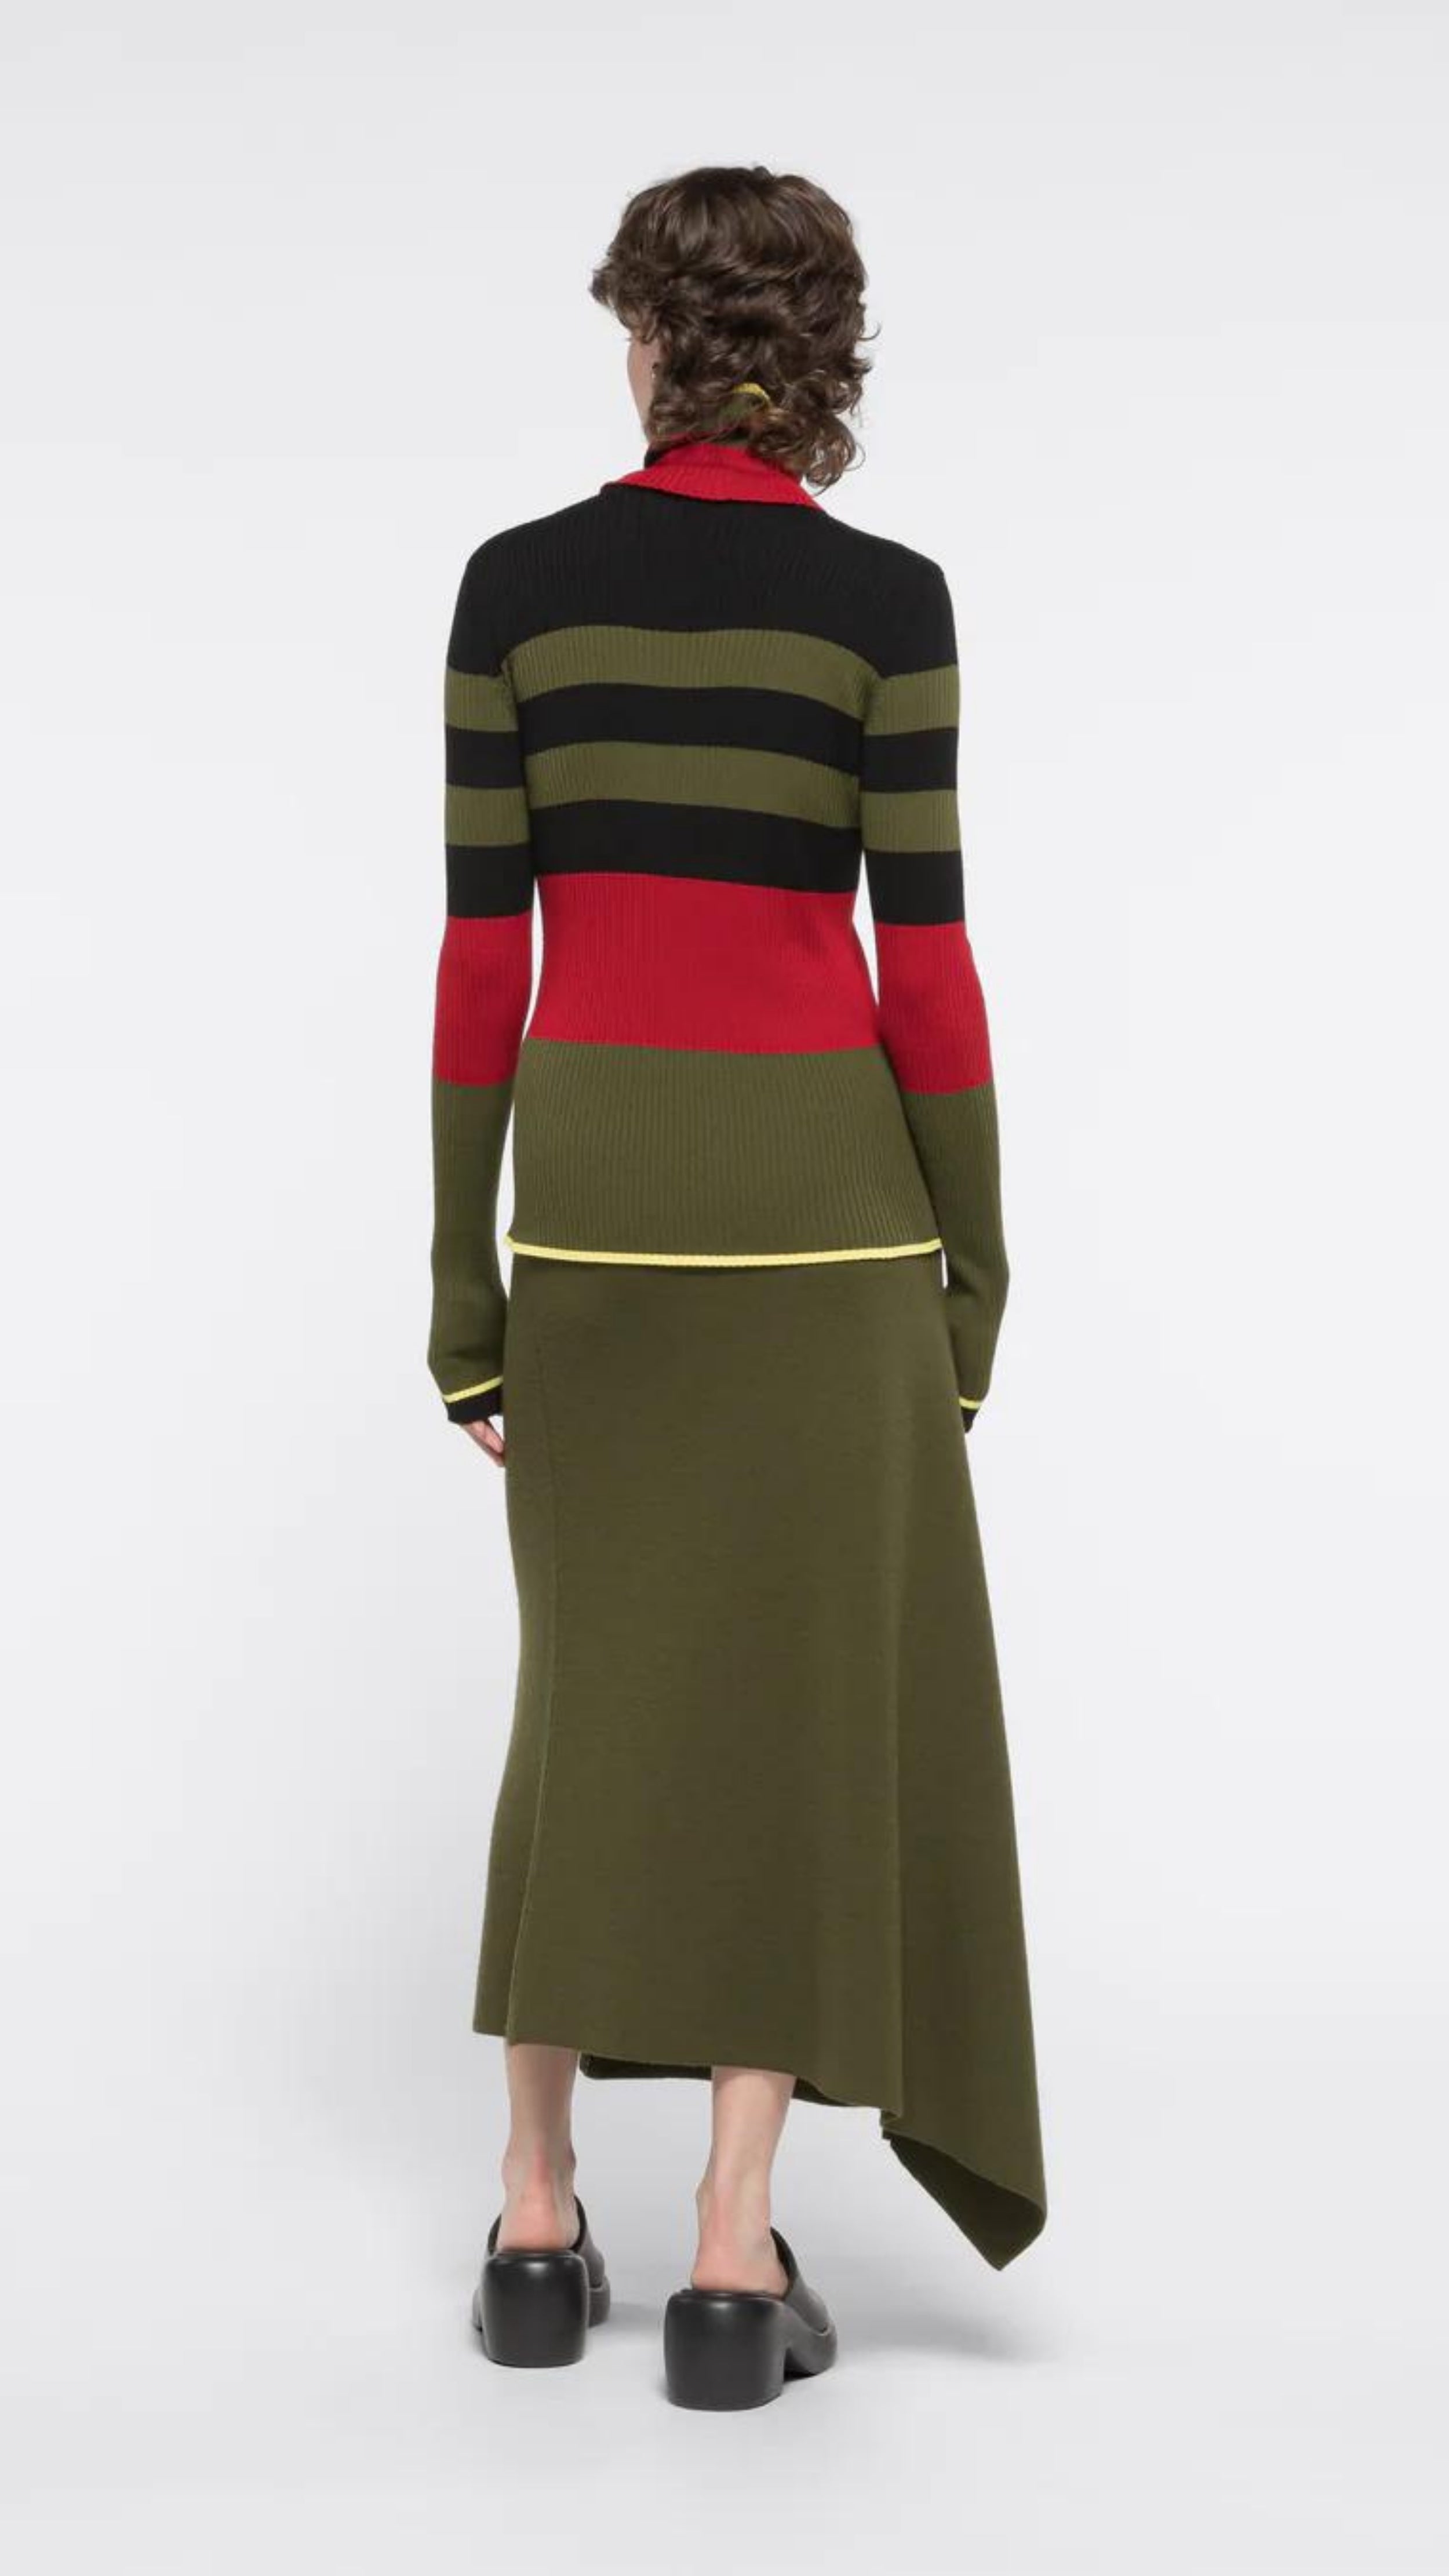 AZ Factory Colville Molly Molloy Lucinda Chambers, Ribbed Midi Skirt Constructed from a ribbed knit material, this skirt features an asymmetrical midi length, with a yellow line across the front. Shown on model facing back